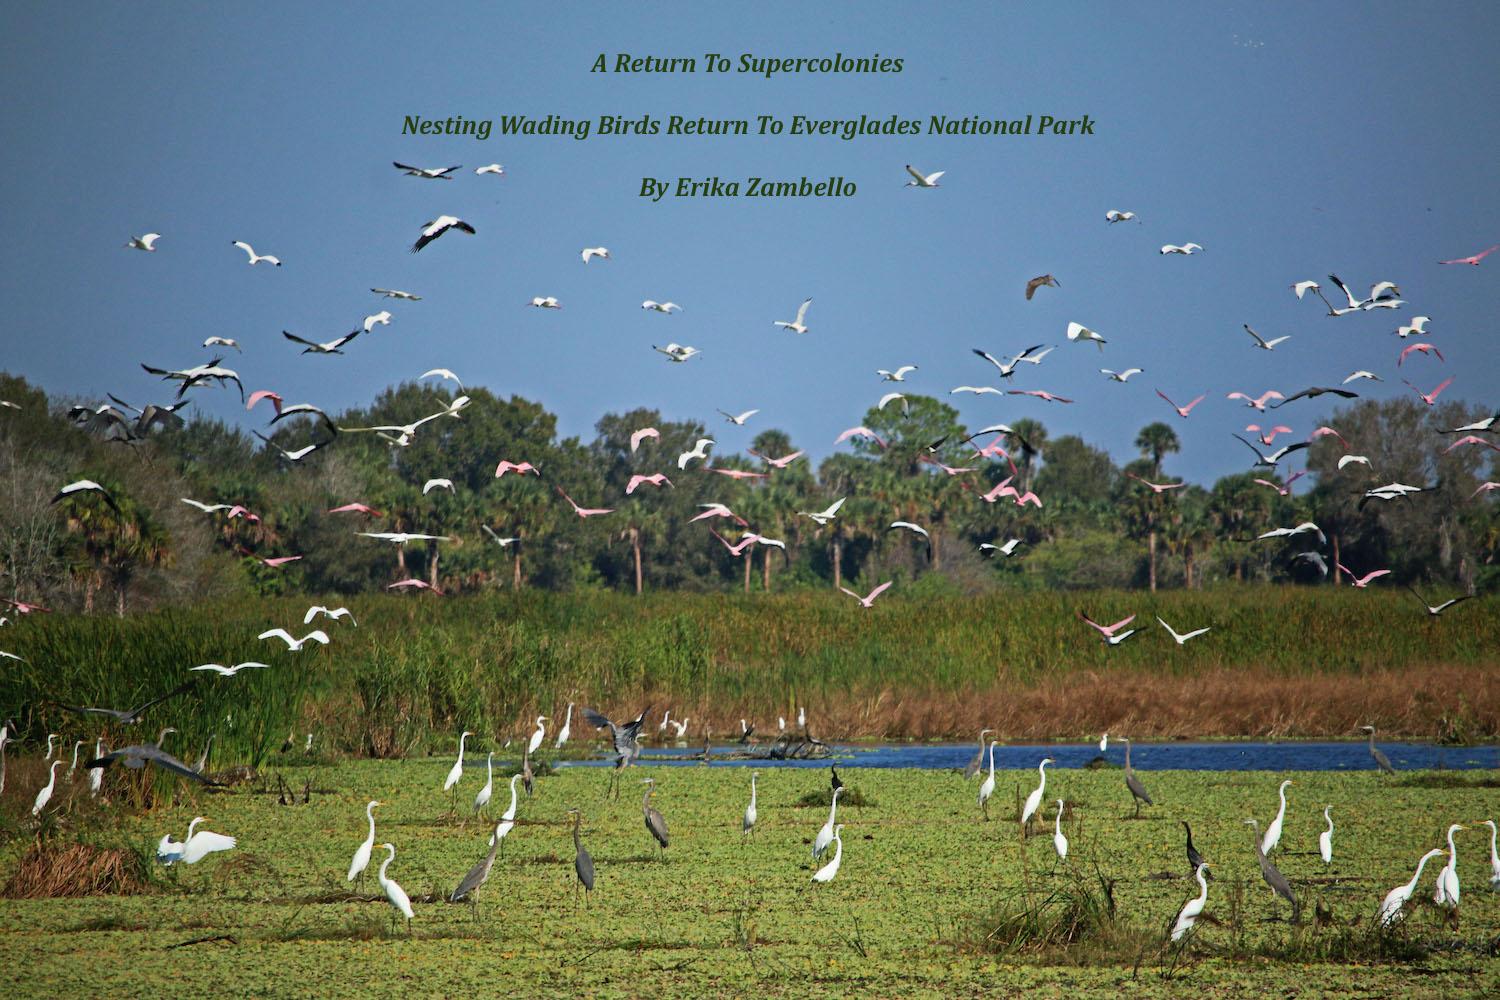 Super colonies of wading birds are returning to Everglades National Park/Erika Zambello